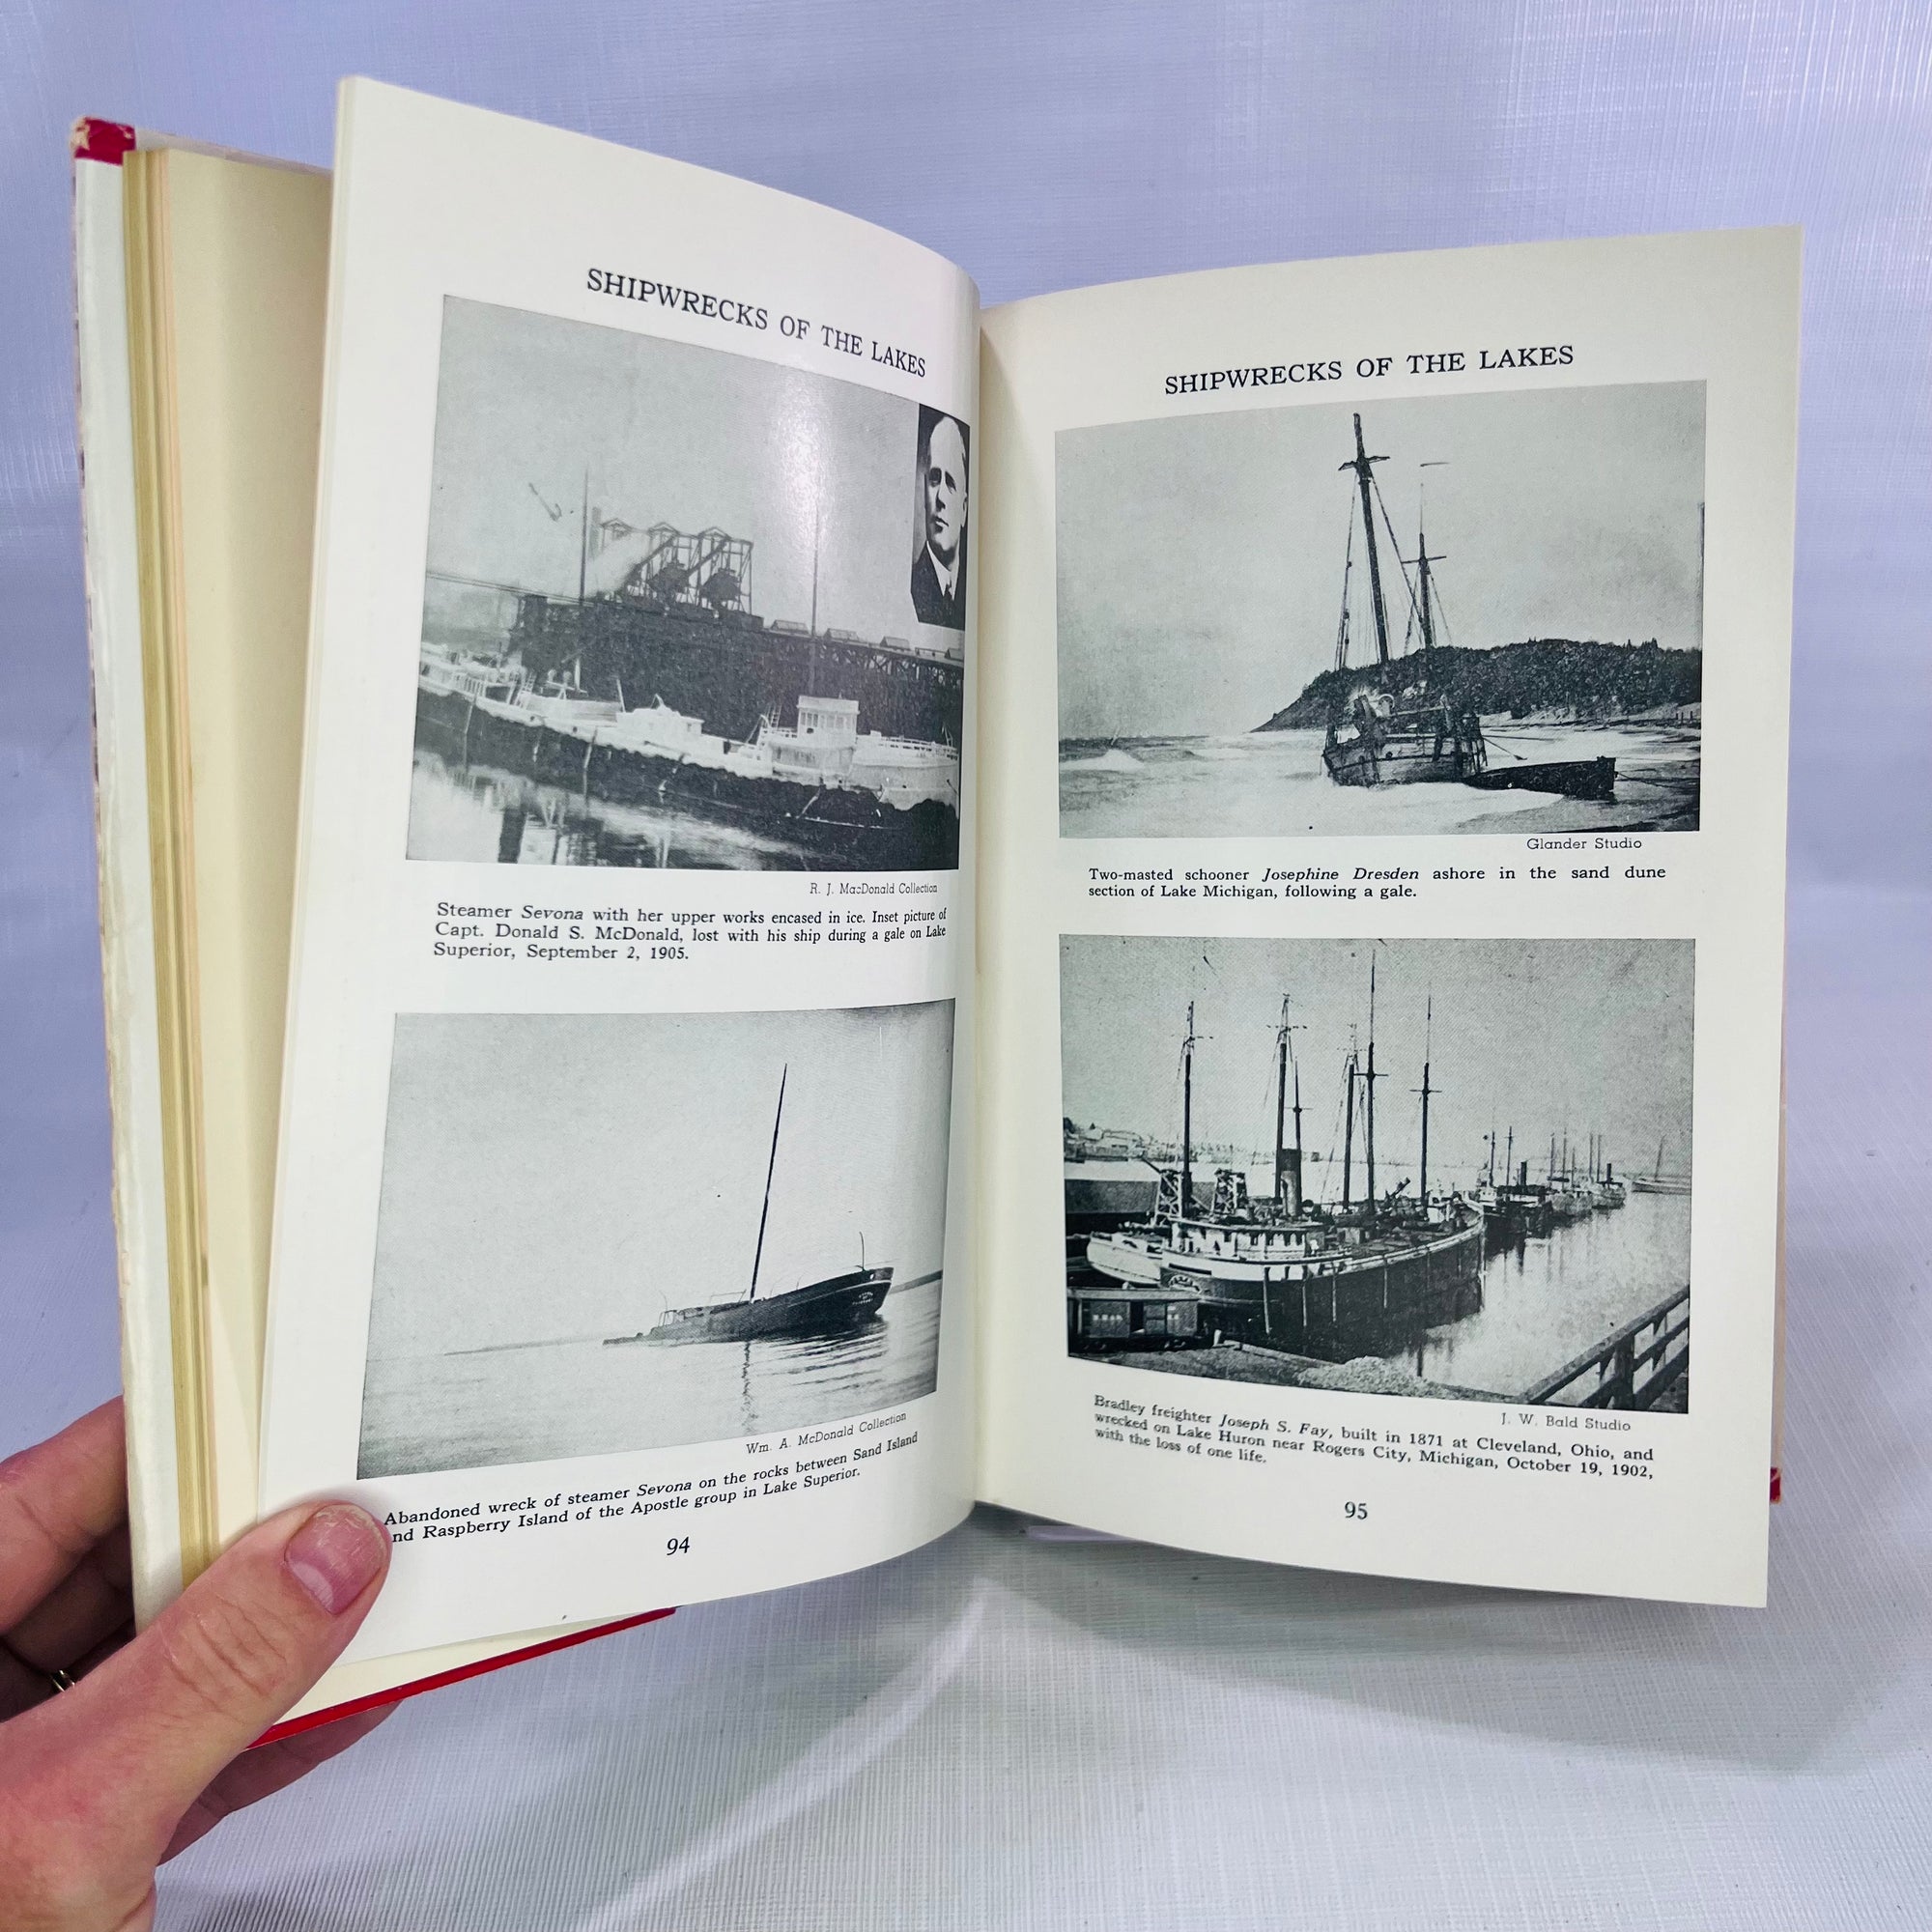 Shipwrecks of the Great Lakes by Dana Thomas Bowen 1952 Self Published by the Author